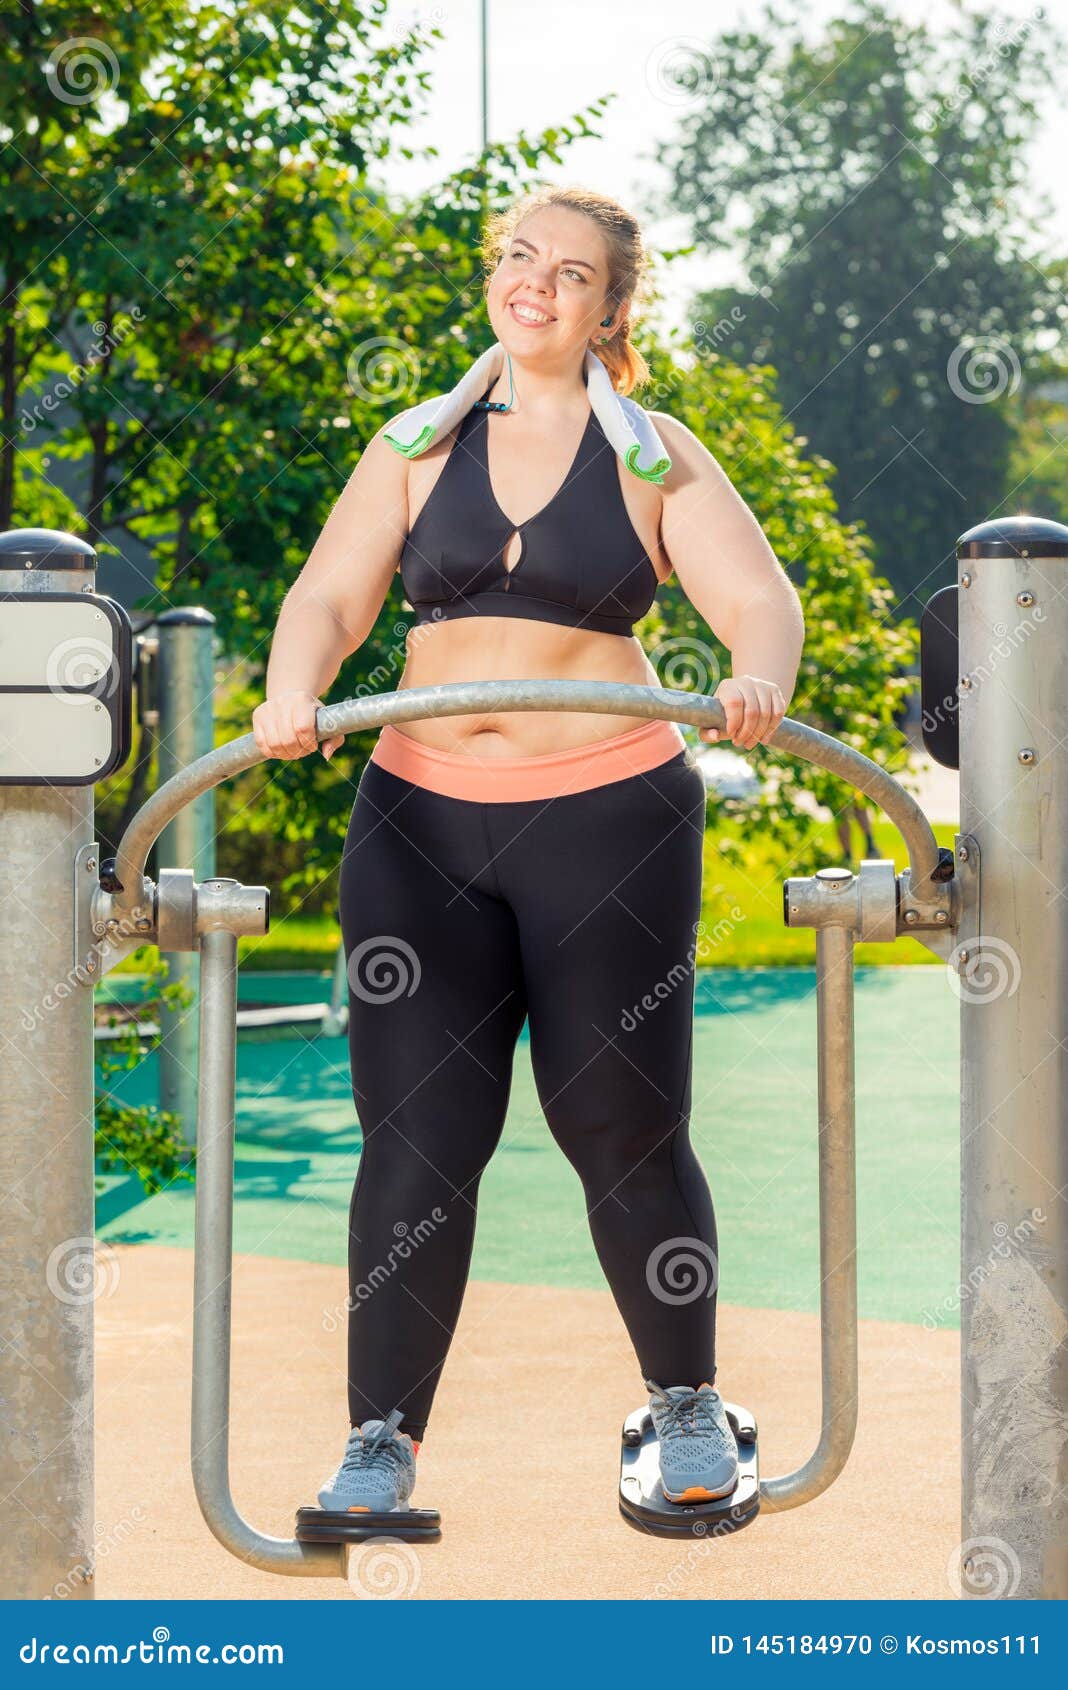 Fat Woman in a Sports Top and Leggings is Engaged on a Simulator